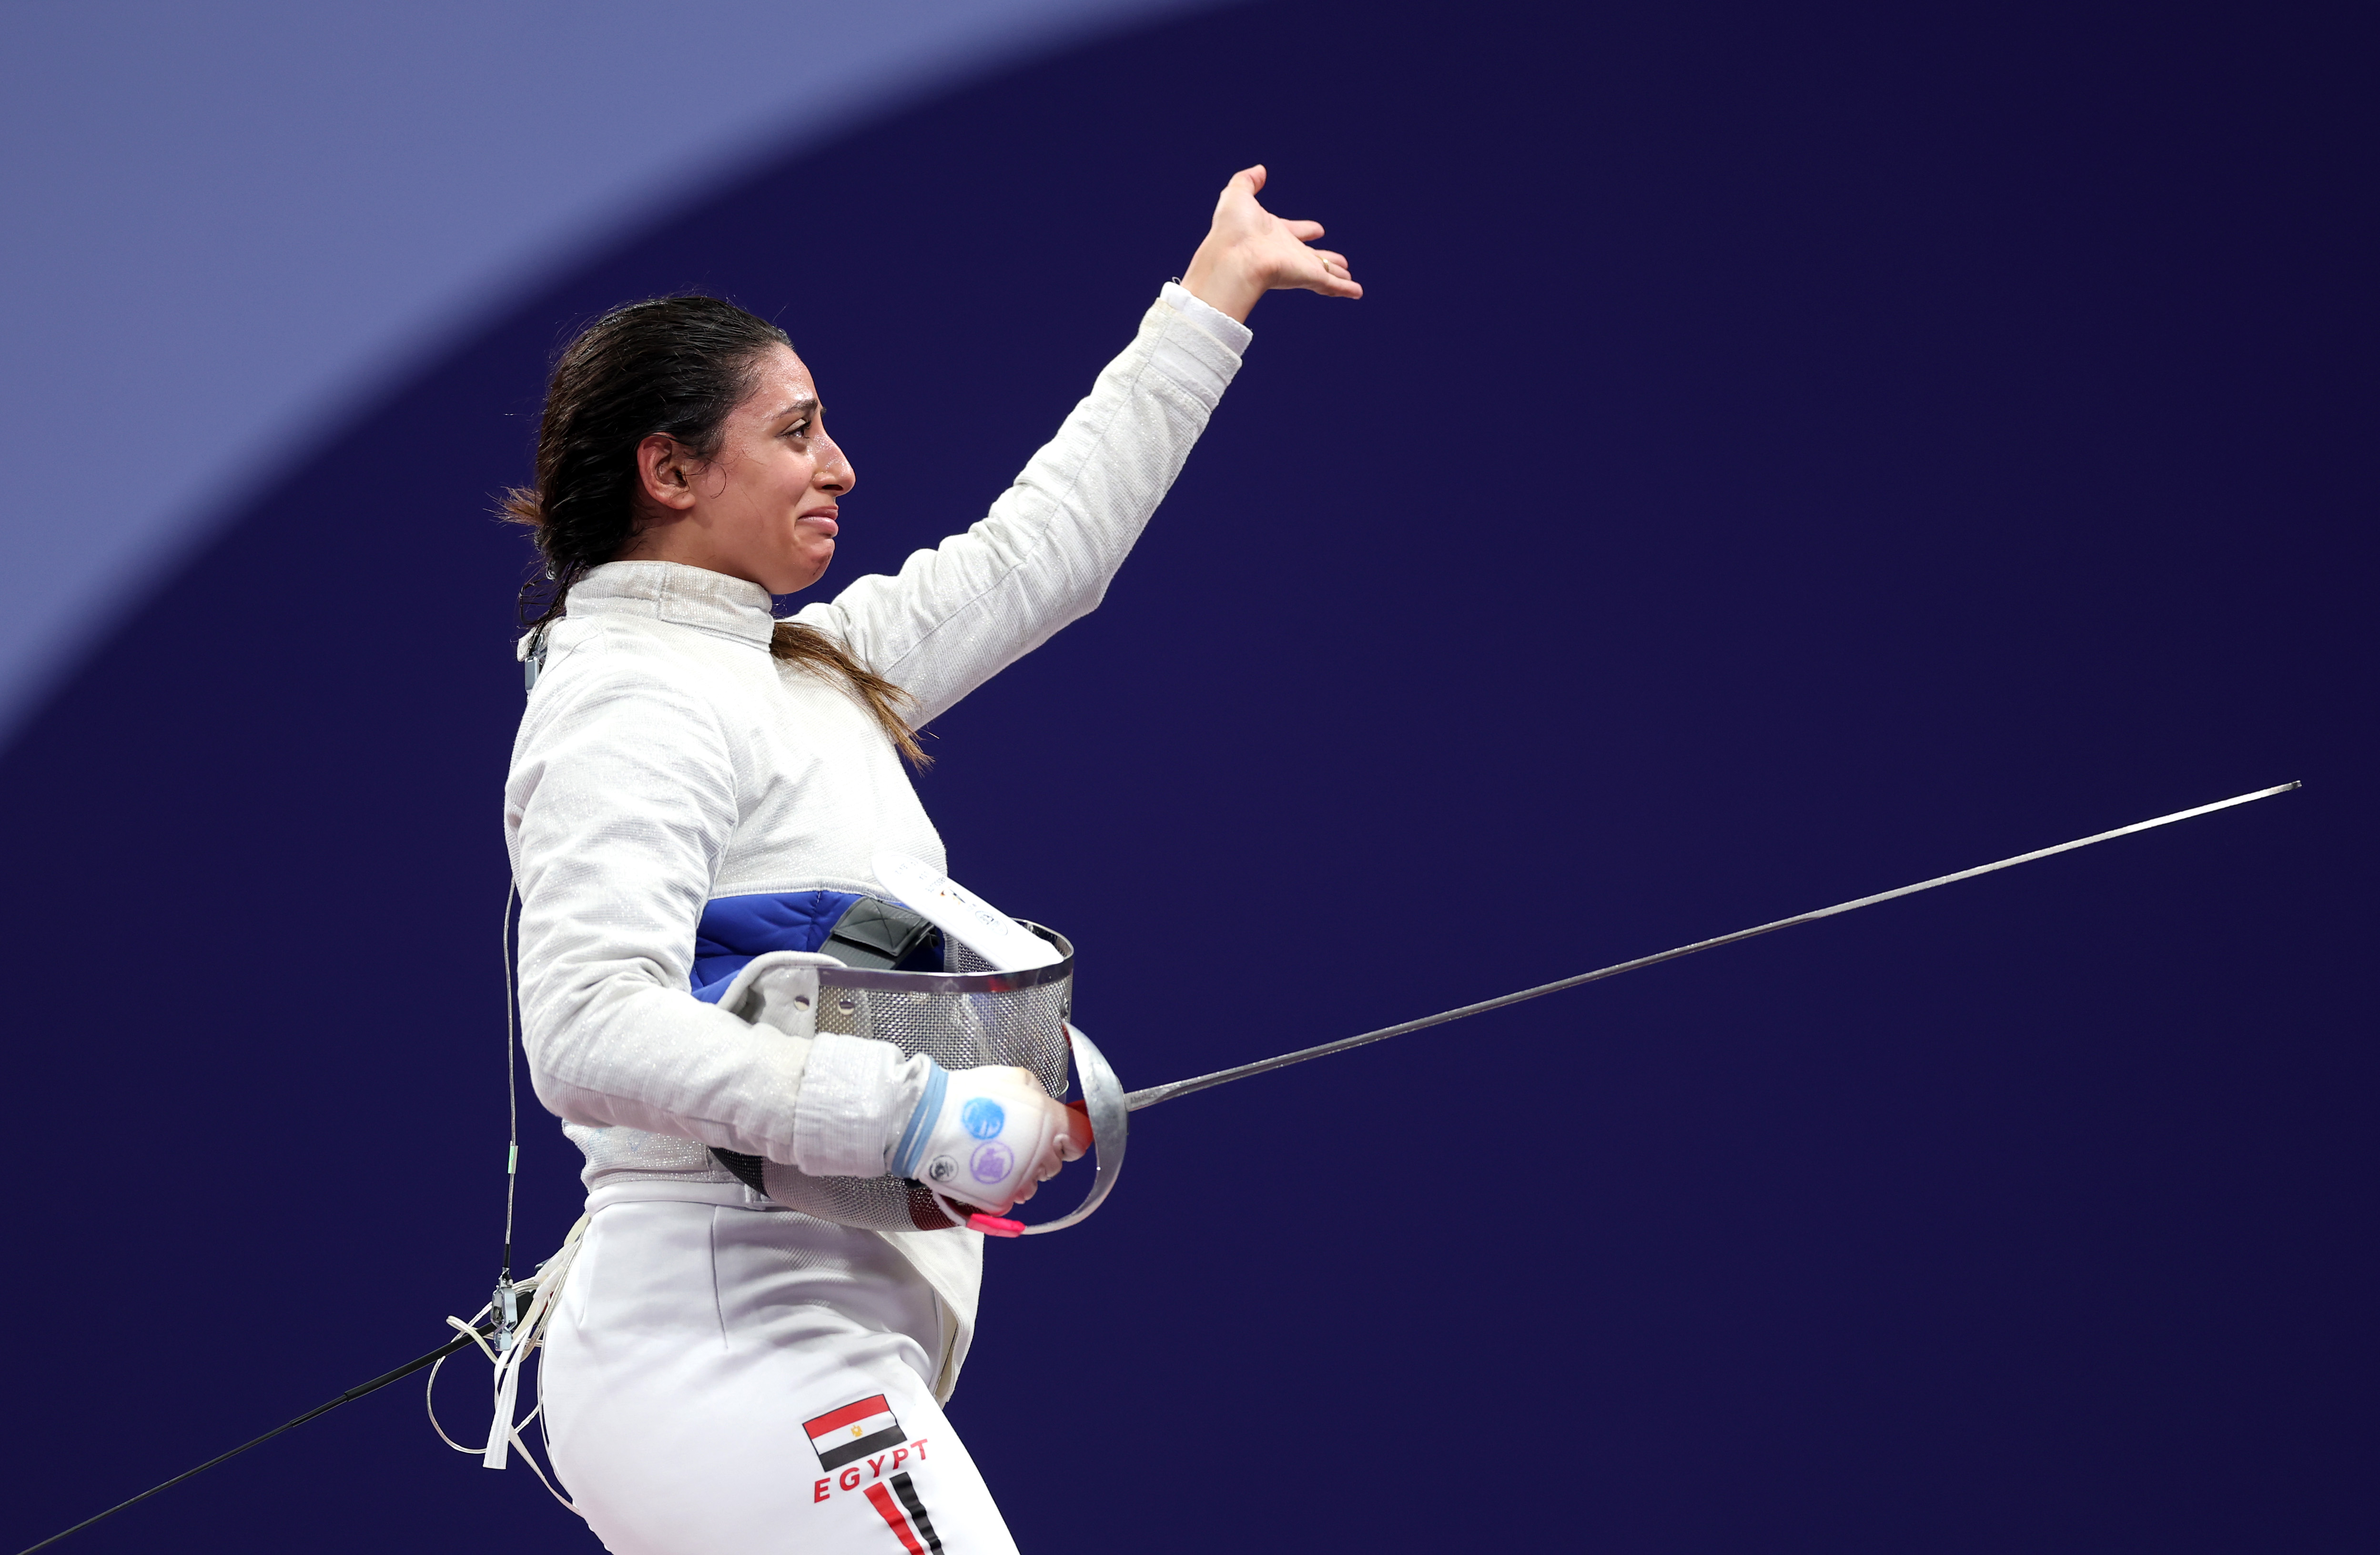 Egyptian fencer reveals she was 7 months pregnant while competing in Paris